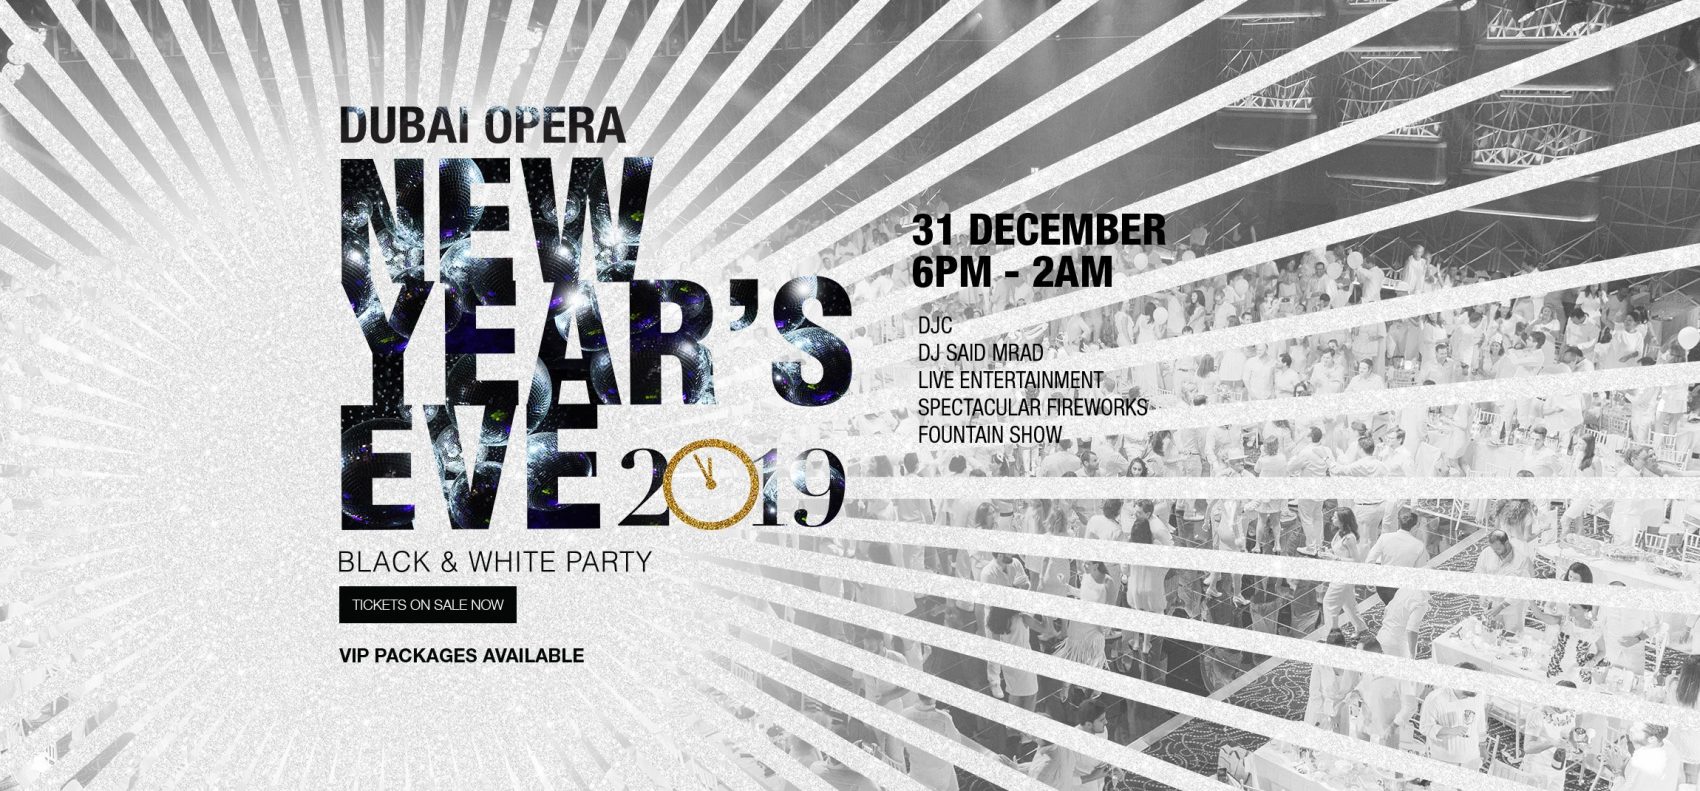 New Year’s Eve Black and White Party at the Dubai Opera - Coming Soon in UAE